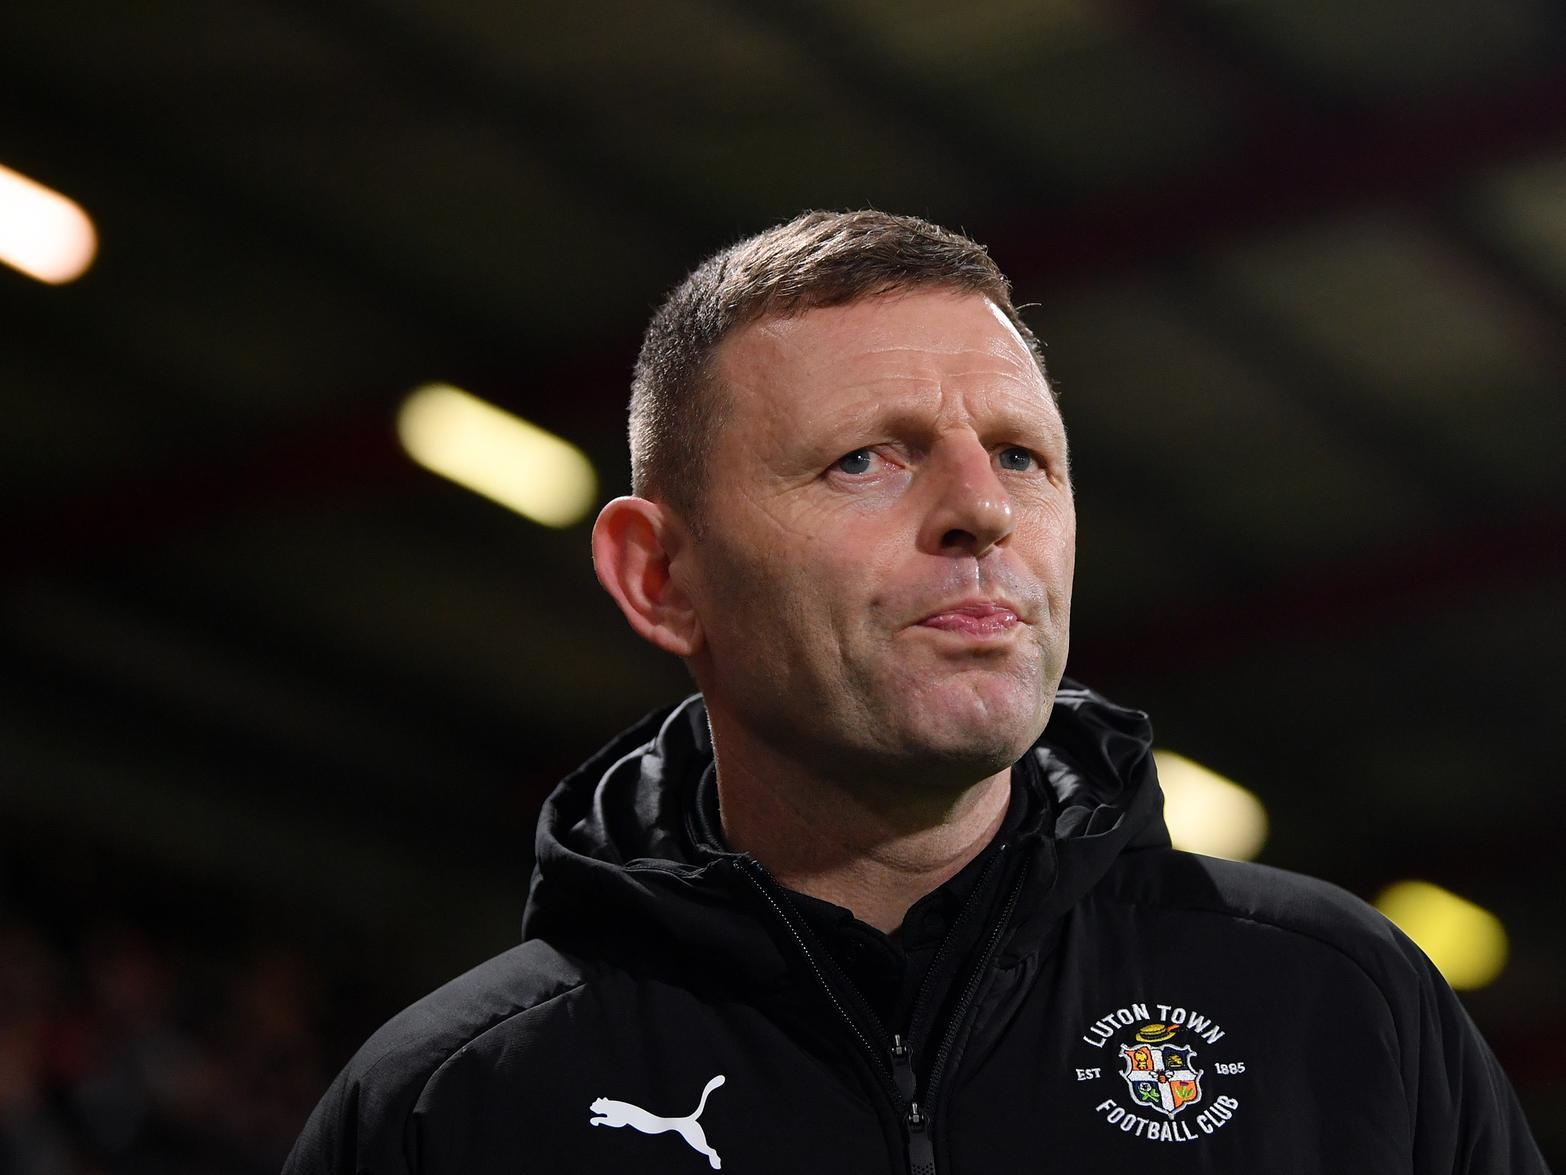 Luton Town boss Graeme Jones has claimed that he's "optimistic" over the club's chances of making some fresh signings this week, as they brace themselves for a relegation battle. (Dunstable Today)